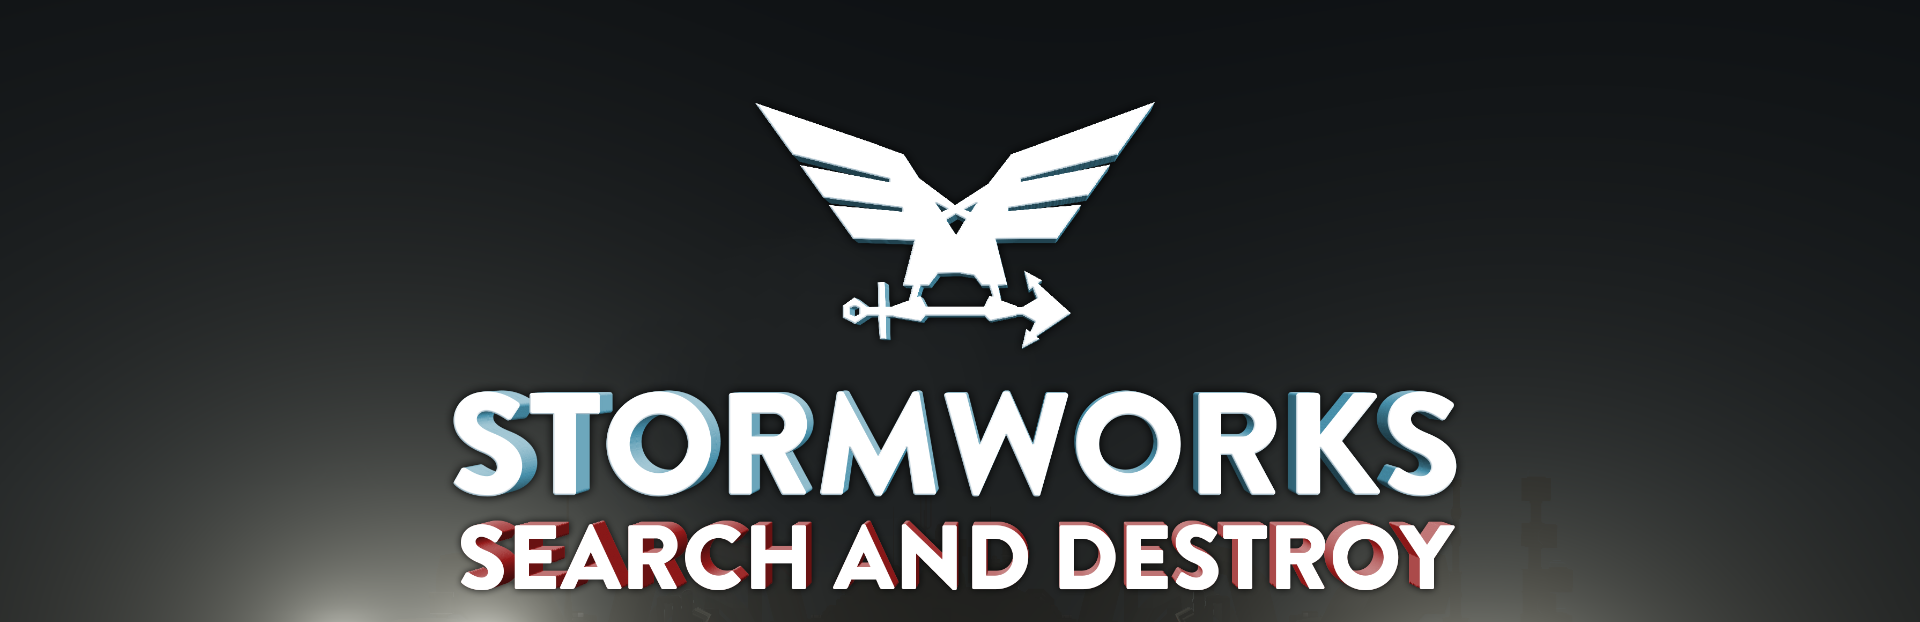 stormworks search and destroy free download